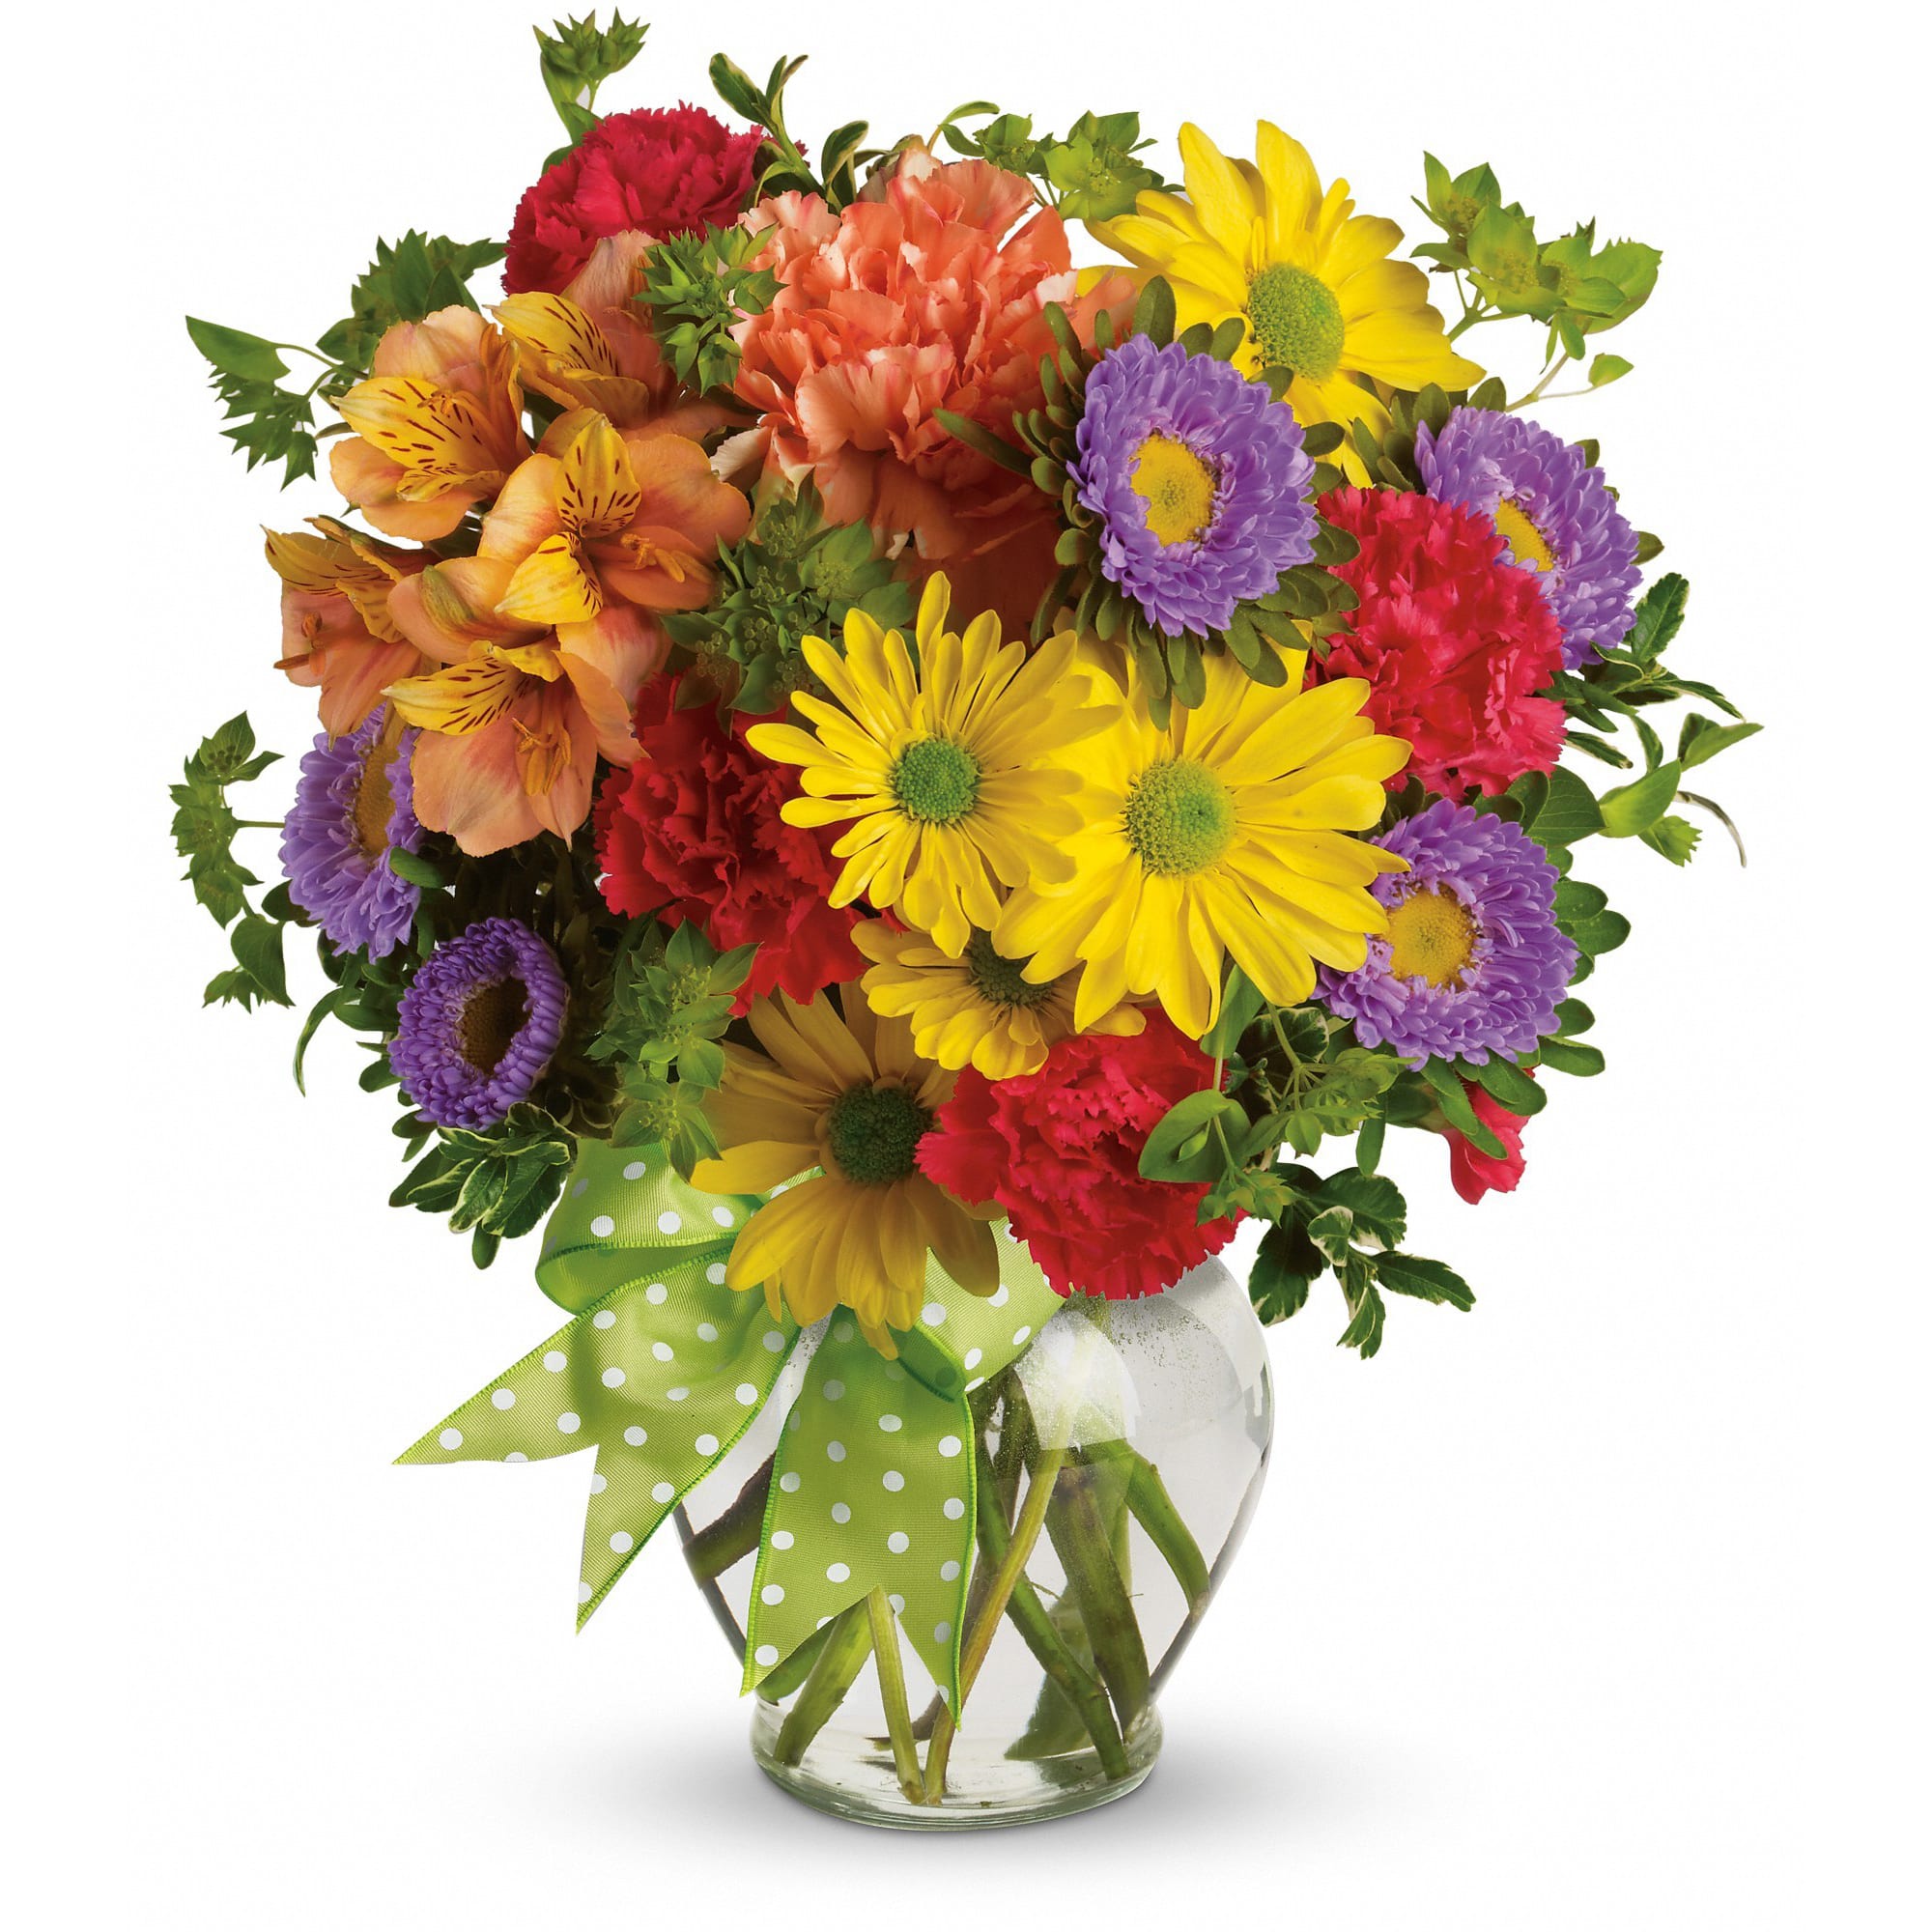 Make a Wish by Teleflora - A summery mix of yellow daisy chrysanthemums, purple asters and red and orange carnations - arranged in a clear ginger vase and adorned with a cheerful green plaid bow - will make their wishes come true!